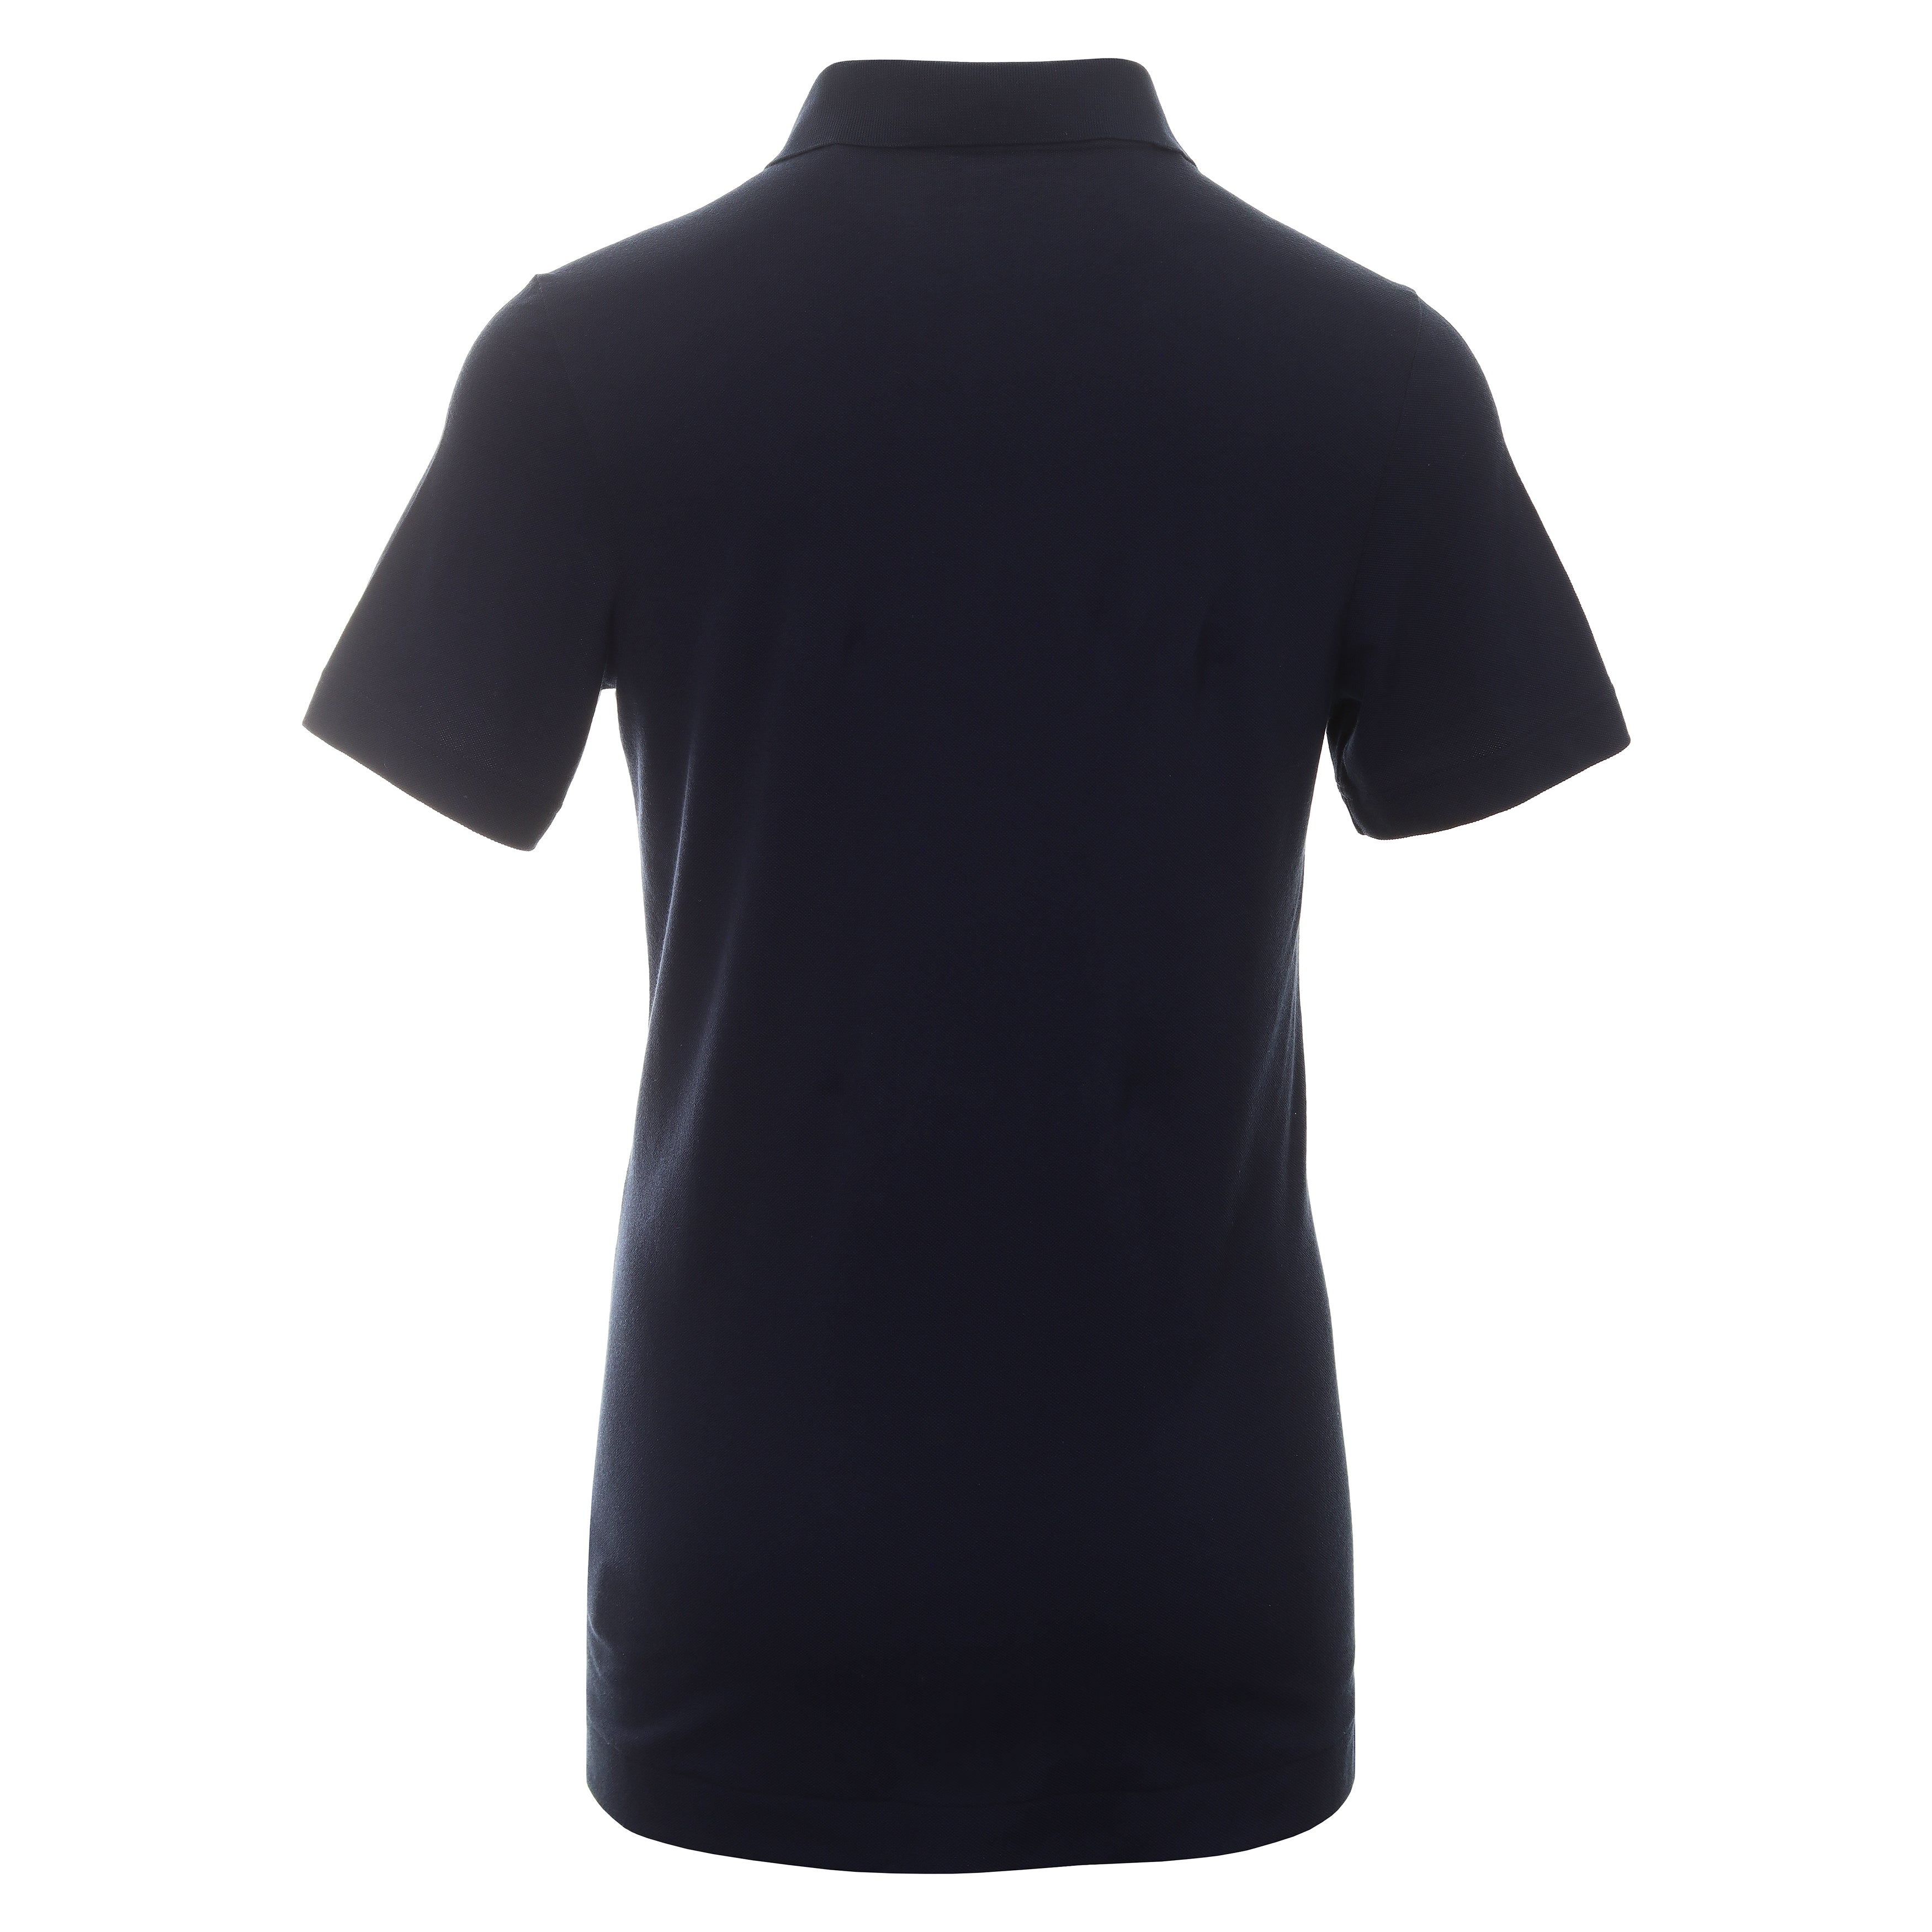 Lacoste Sport Pique Polo Shirt DH9309 Navy 423 | Function18 | Restrictedgs